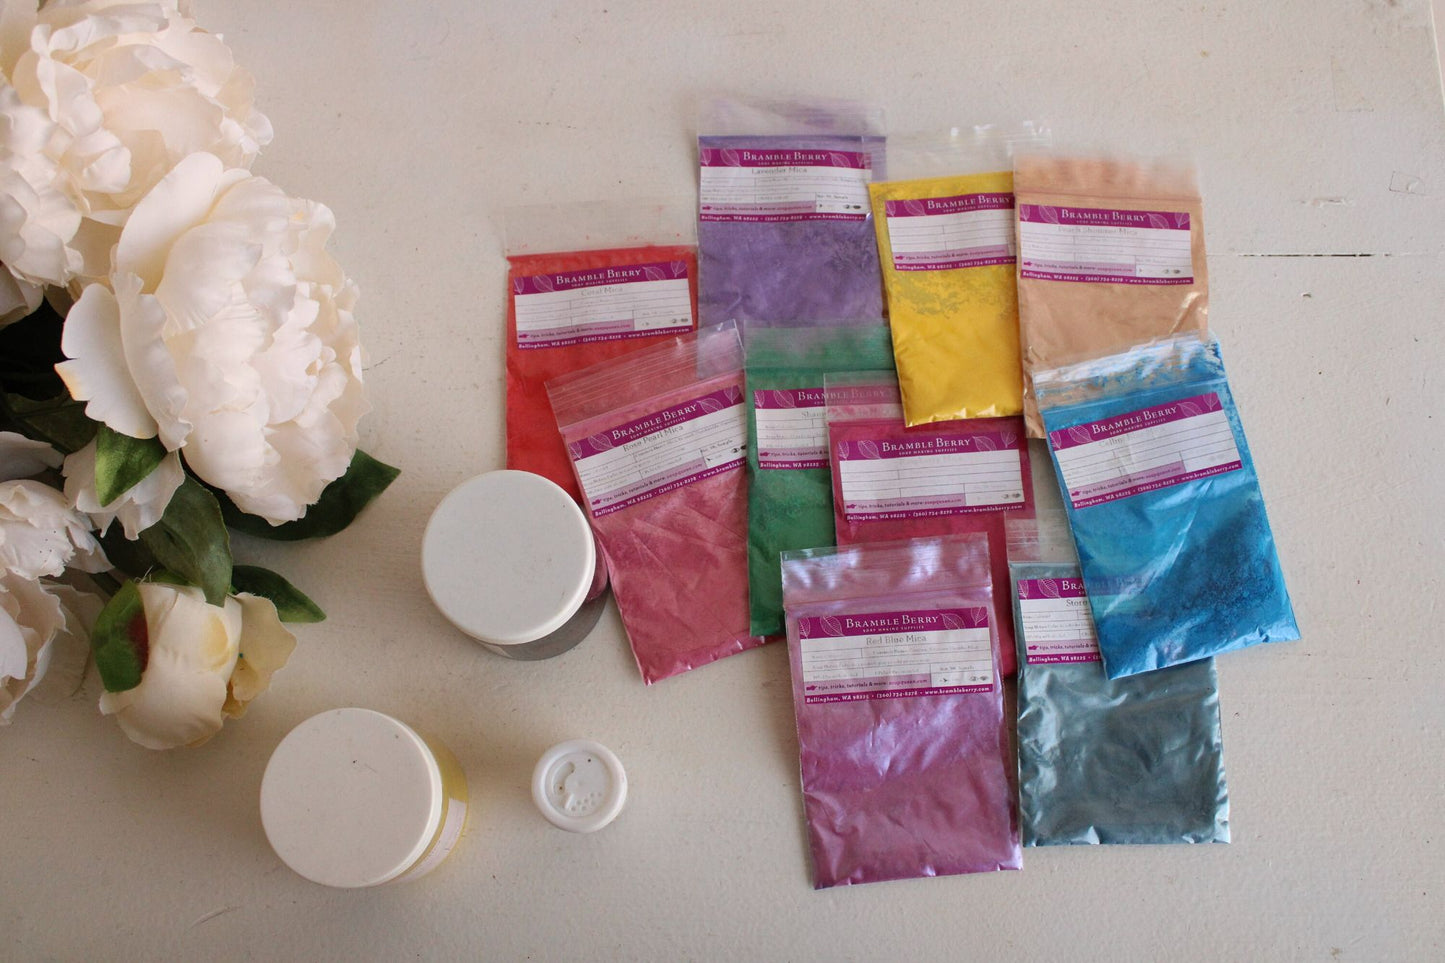 Lot of Mica Powders, By Bramble Berry, For Soap, Resin, Bath and Body and More, Sample Packs